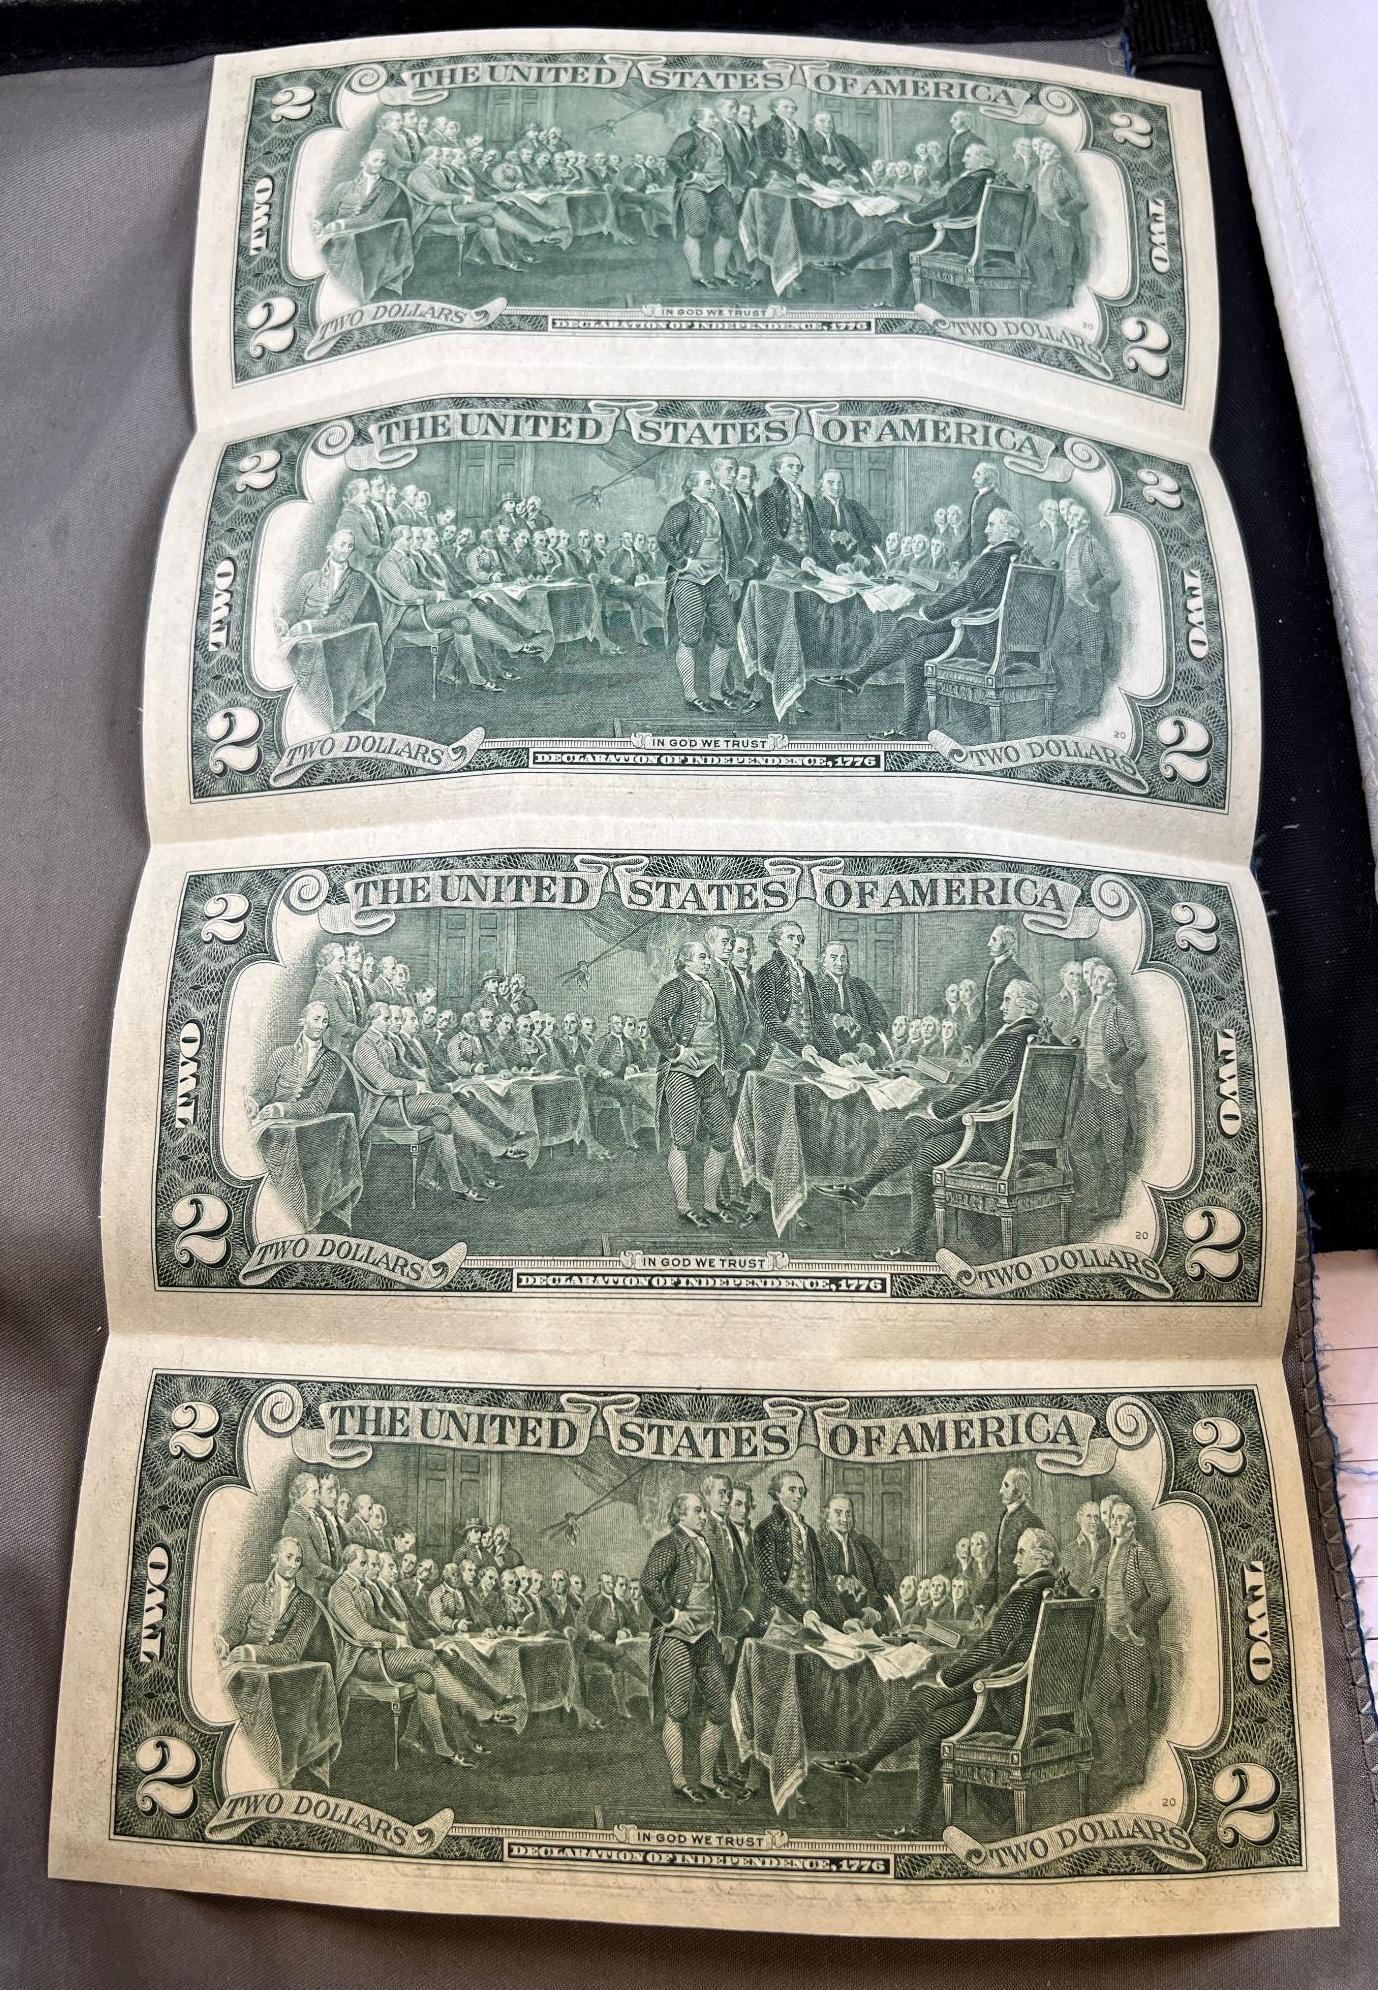 Uncut sheet of 4- 1976 $2.00 Federal Reserve STAR notes, this had been folded, but UNC